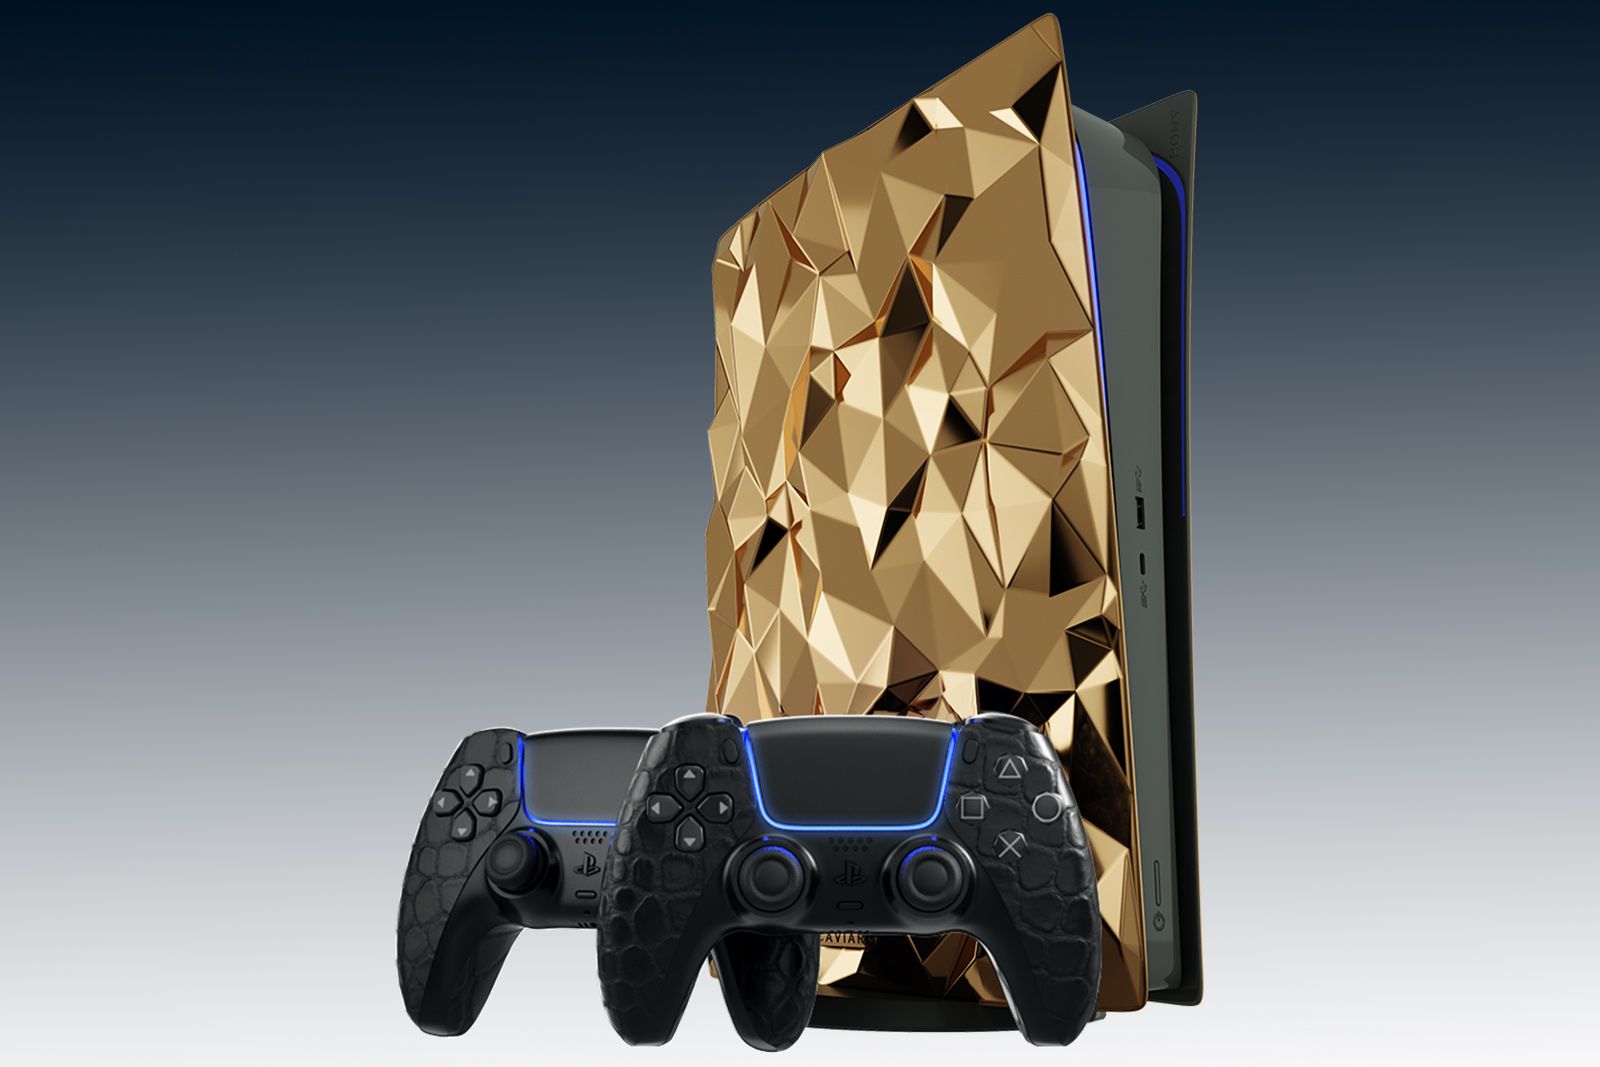 Bet scalpers won't go near this gold PS5 - $500K price will see to that photo 1